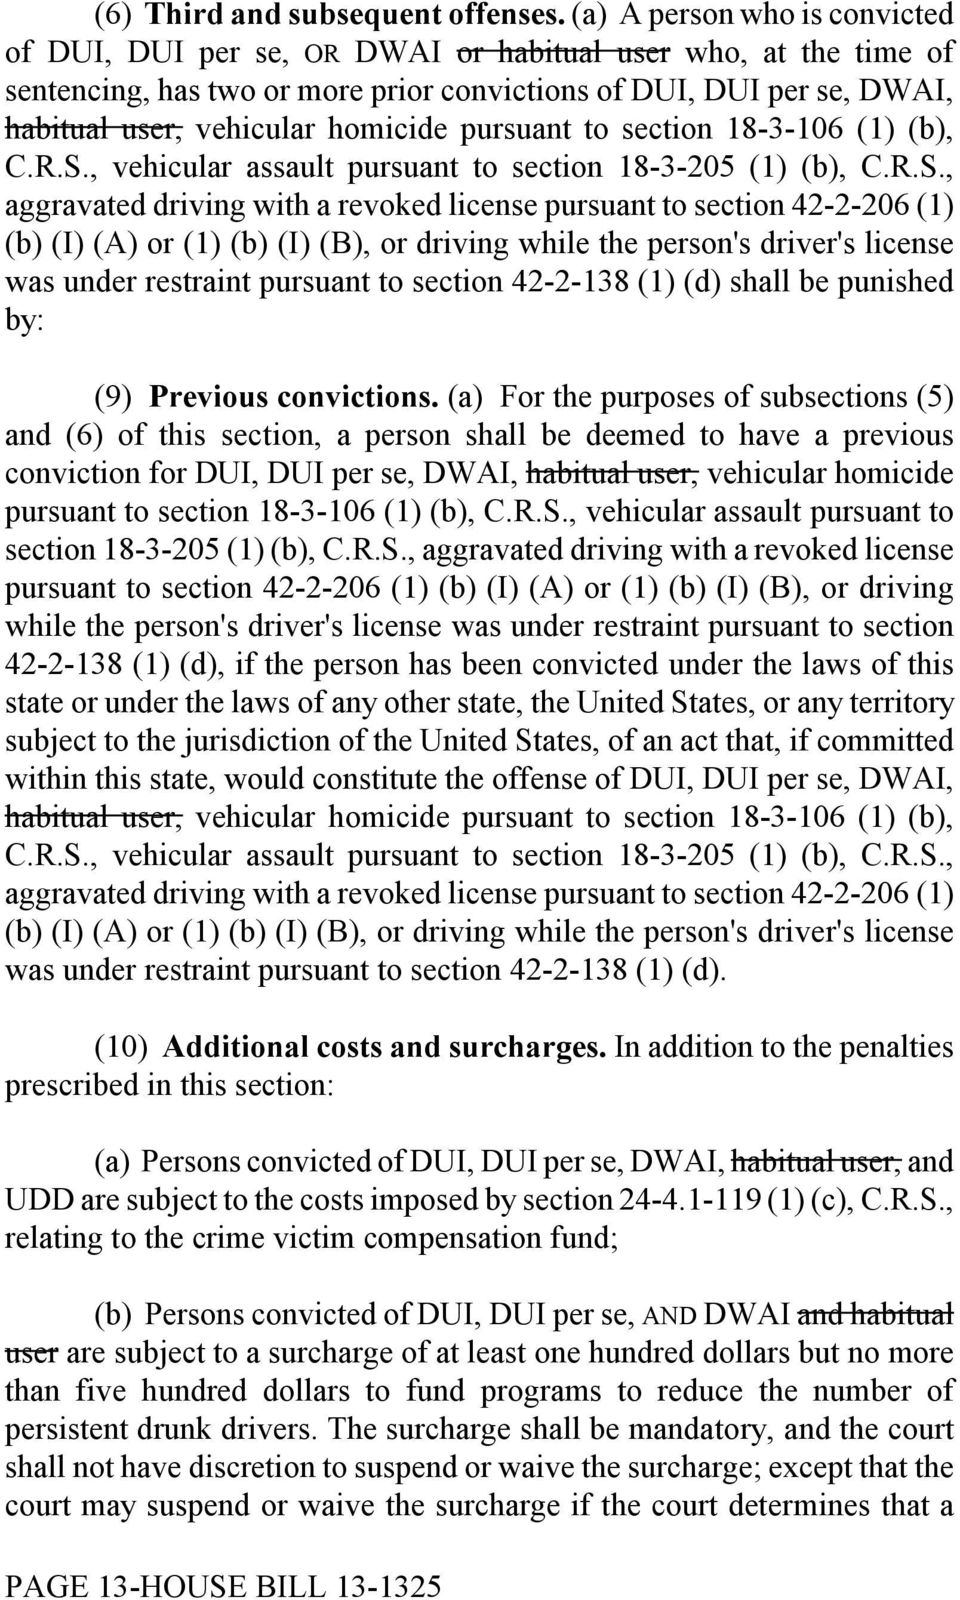 homicide pursuant to section 18-3-106 (1) (b), C.R.S.